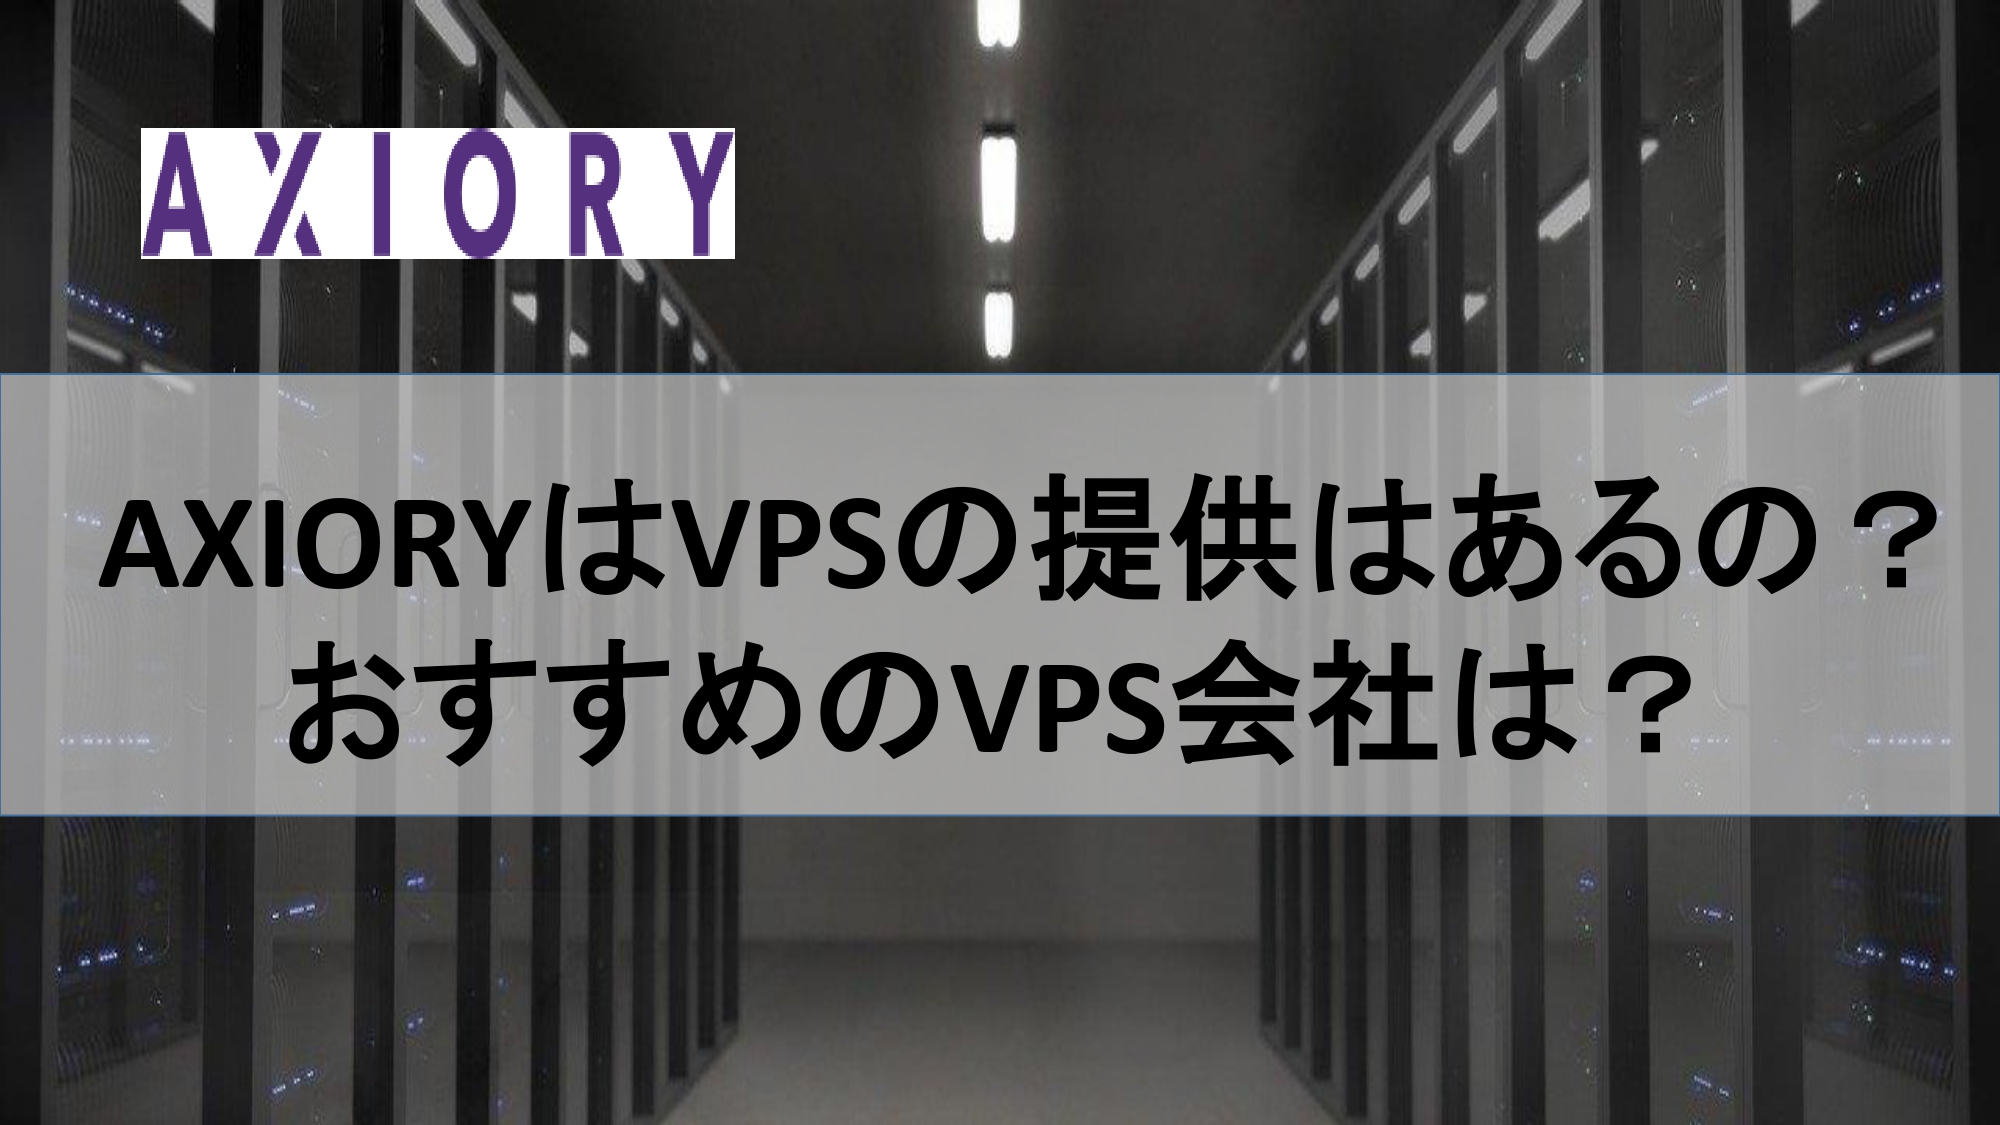 AXIORYはVPSの提供はあるの？